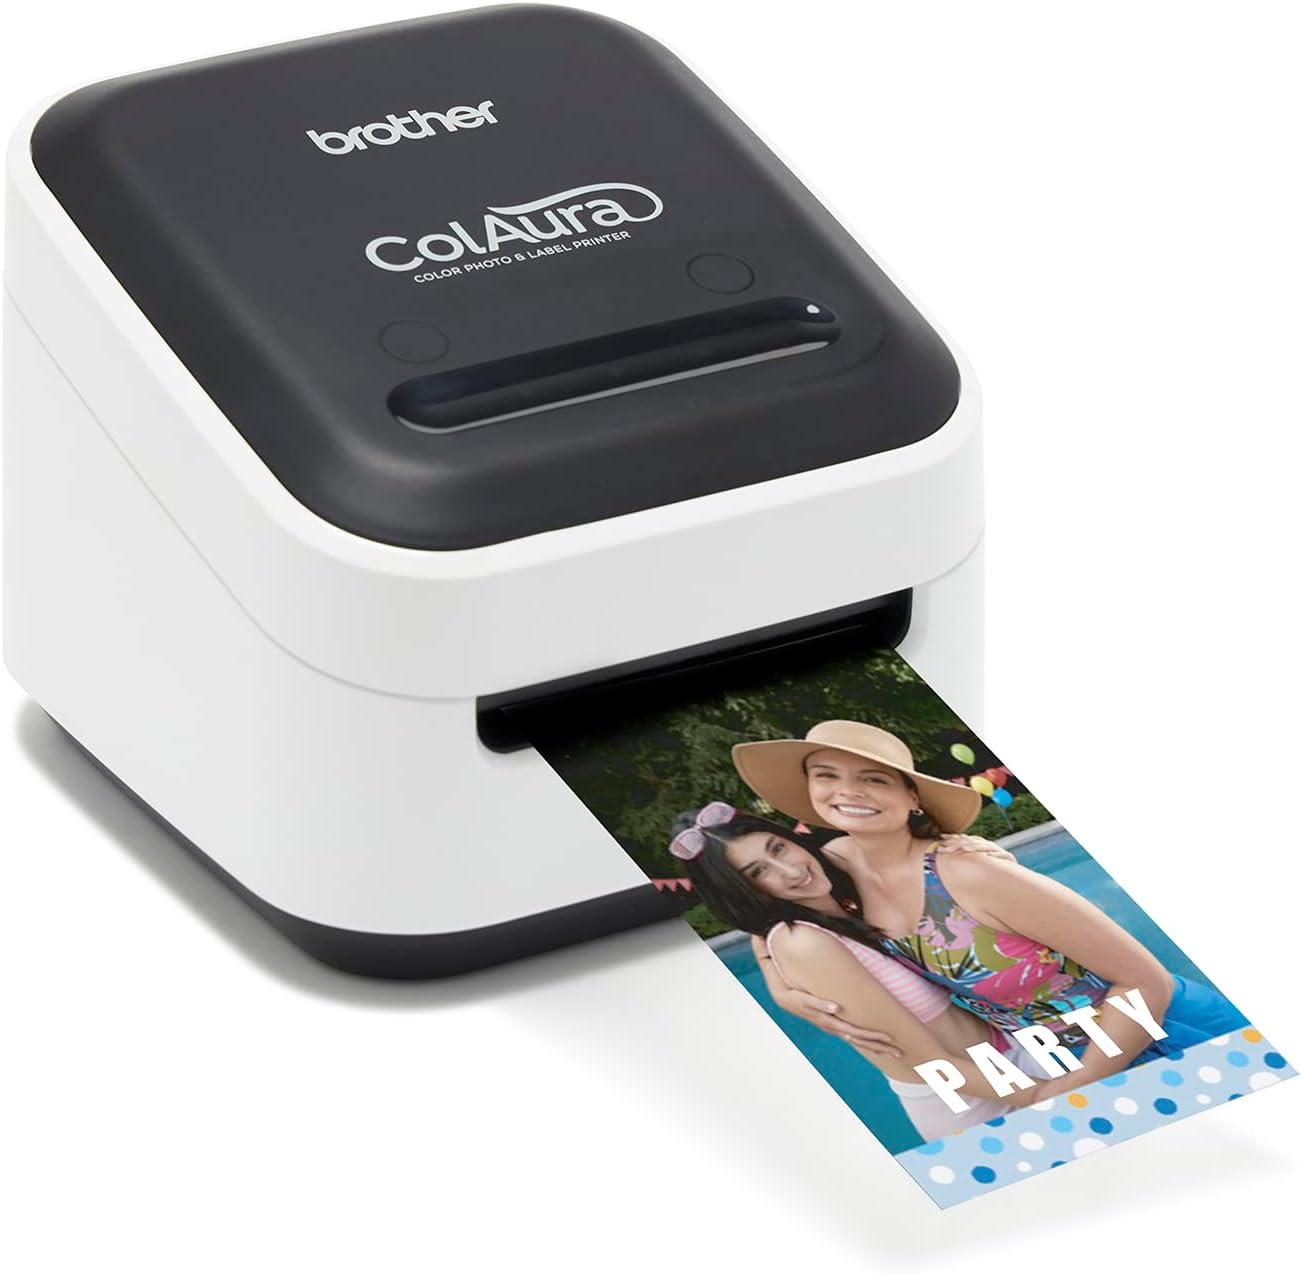 ColAura Color Photo and Label Printer